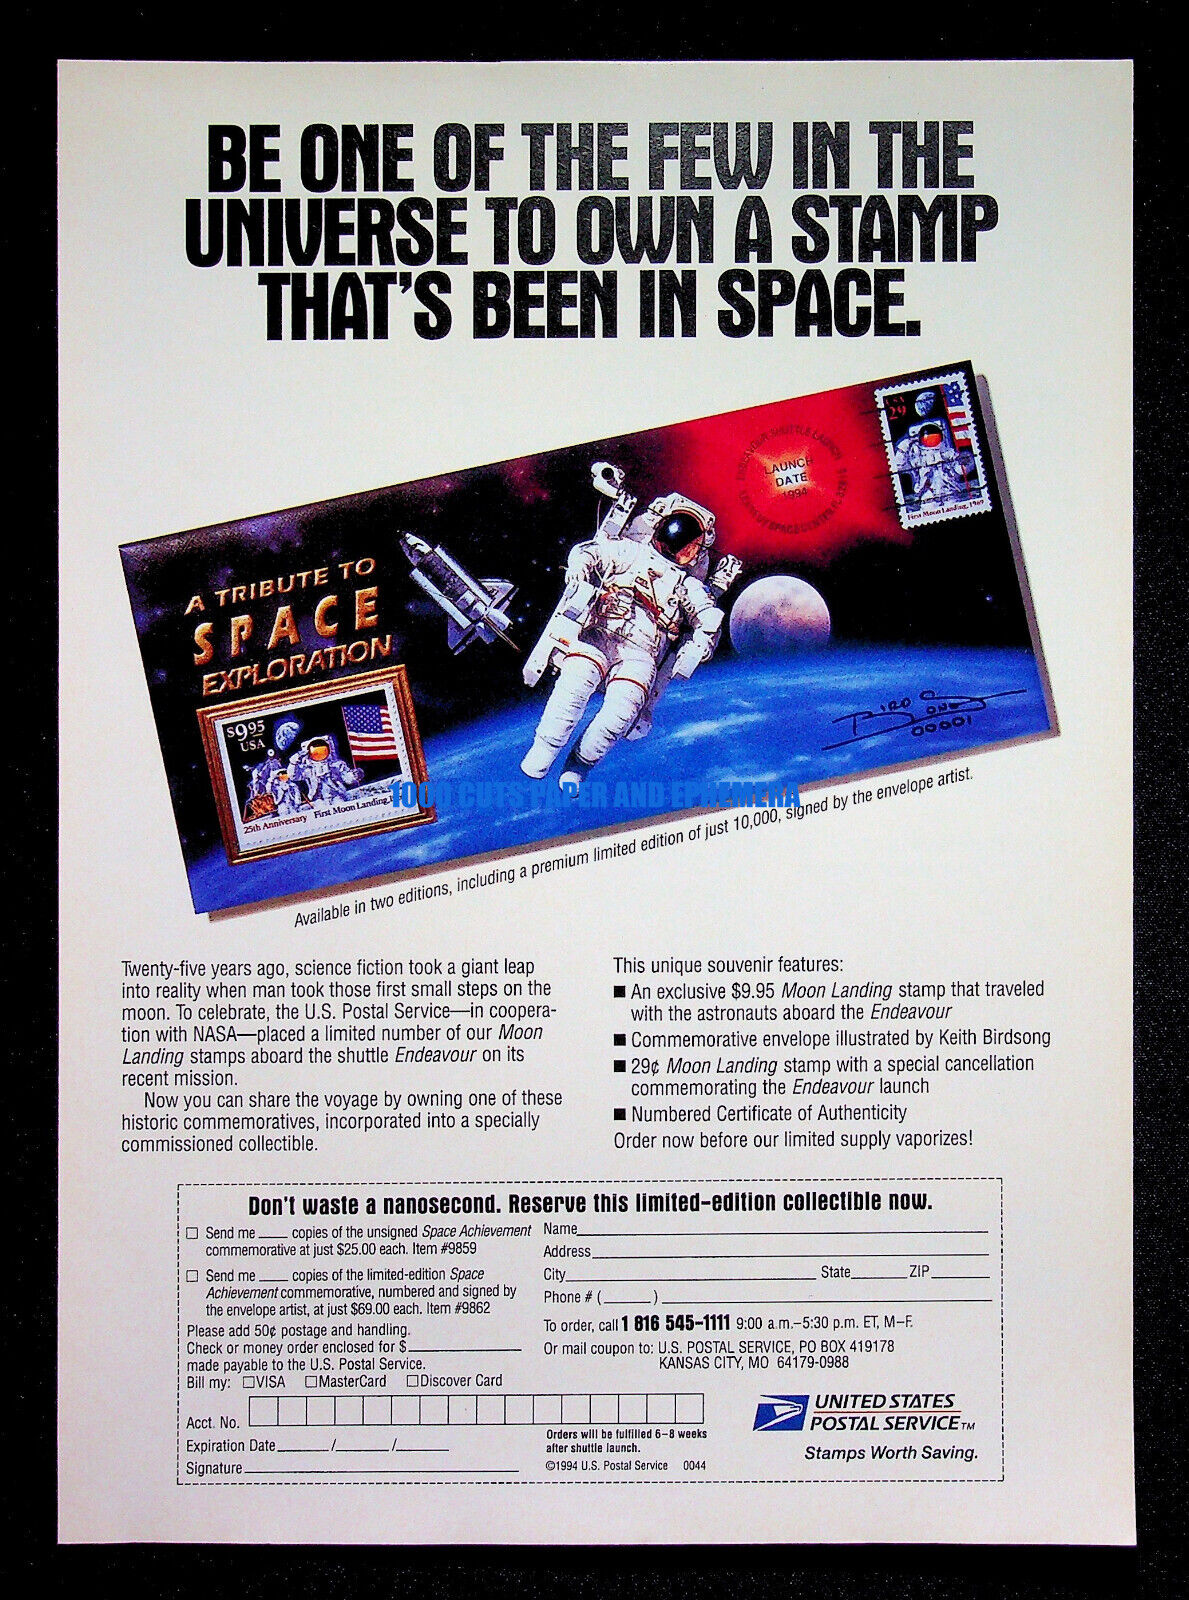 USPS United States Postal Service Space Stamps 1994 Trade Print Magazine Ad Post